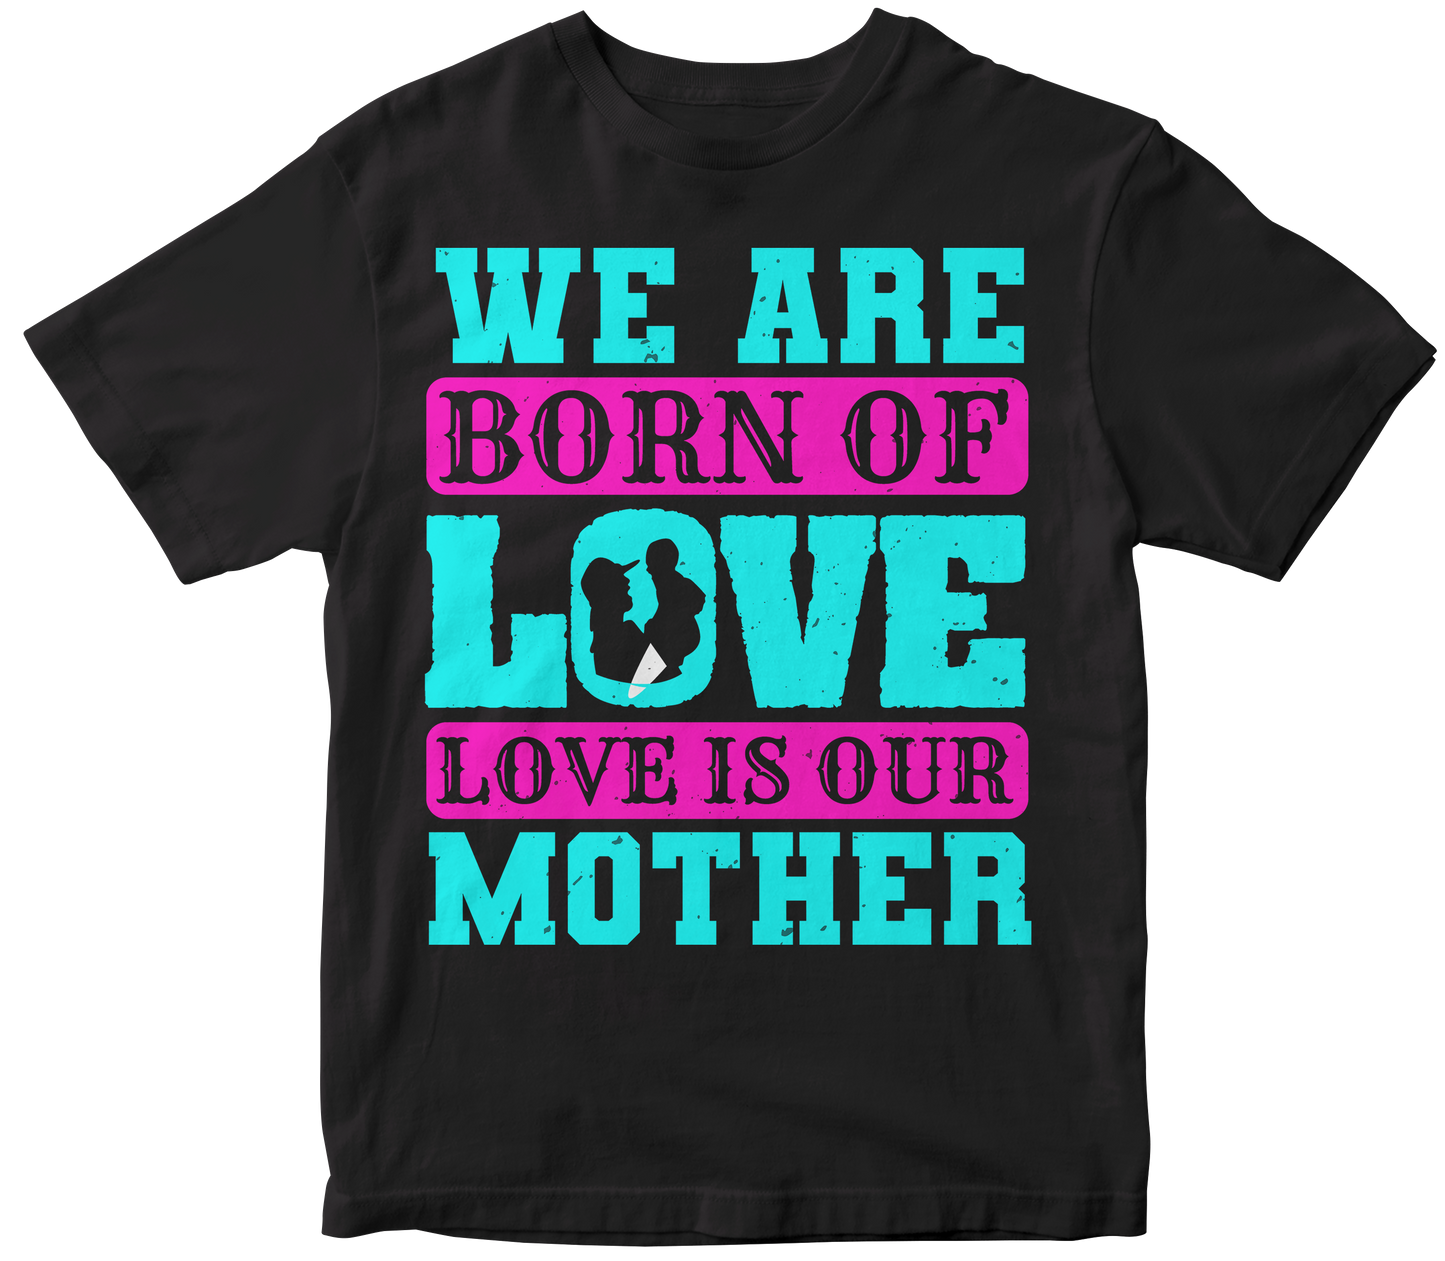 We are born of love love is our mother